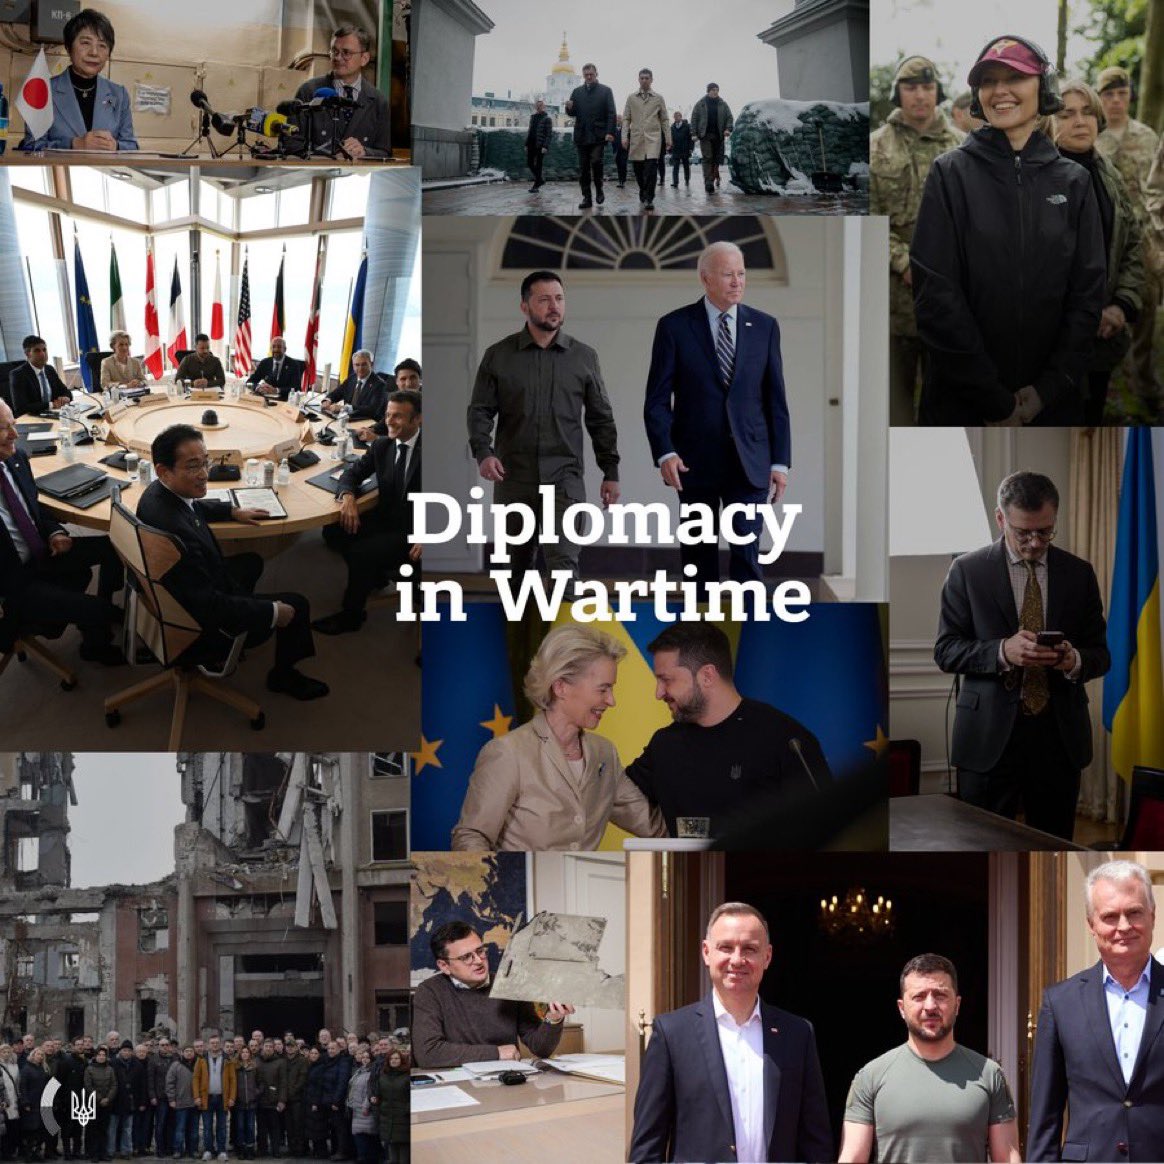 🇺🇦 After Russia launched a full-scale war against Ukraine, our state's diplomacy has undergone significant changes from the way we conduct negotiations to the need to highlight 🇷🇺's war crimes

➡️ Learn more about how Ukraine has 'reinvented' diplomacy: wartimediplomacy.mfa.gov.ua